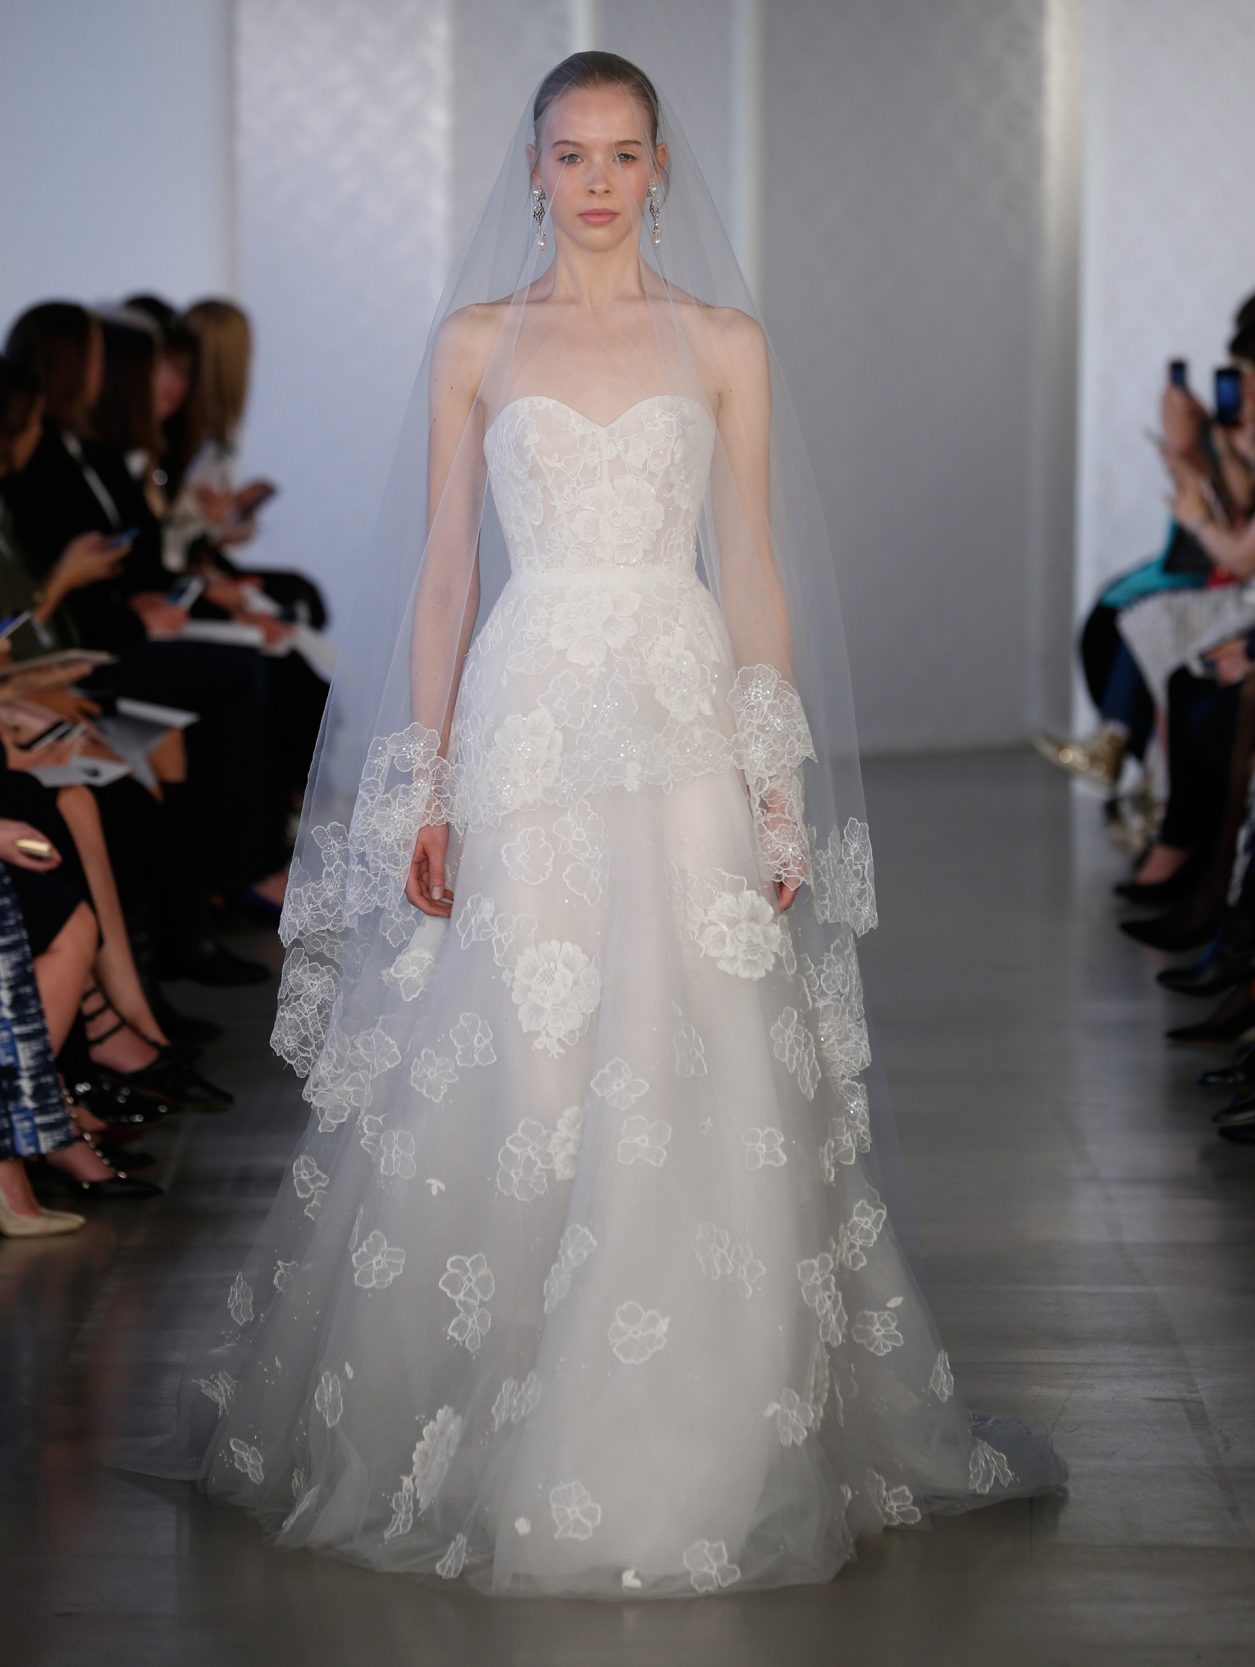 4 Bridal Trends That Are Making a Splash This Year - Page 4 of 4 ...